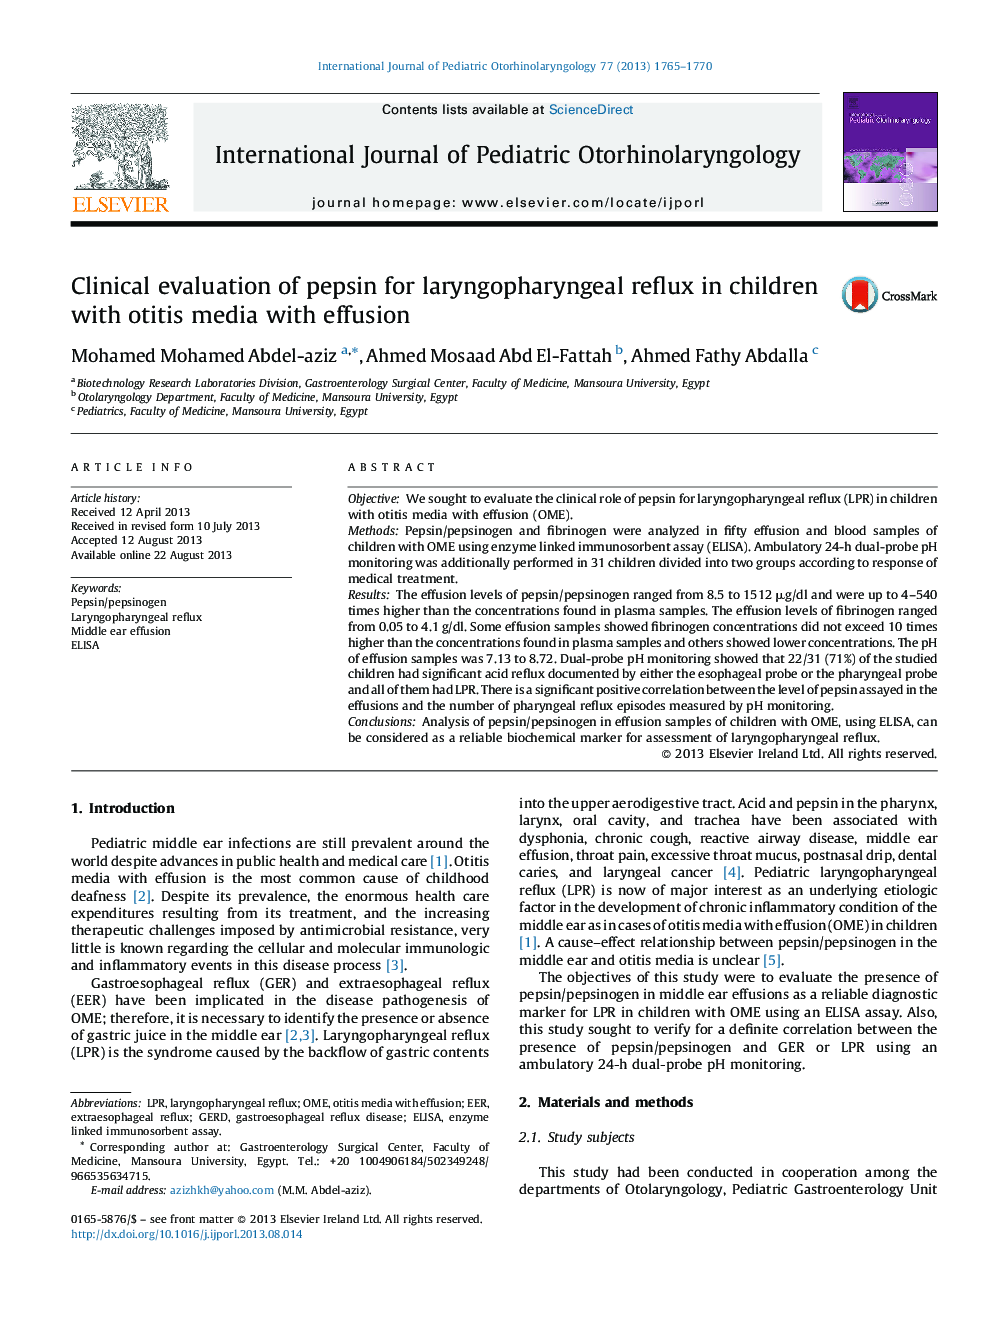 Clinical evaluation of pepsin for laryngopharyngeal reflux in children with otitis media with effusion